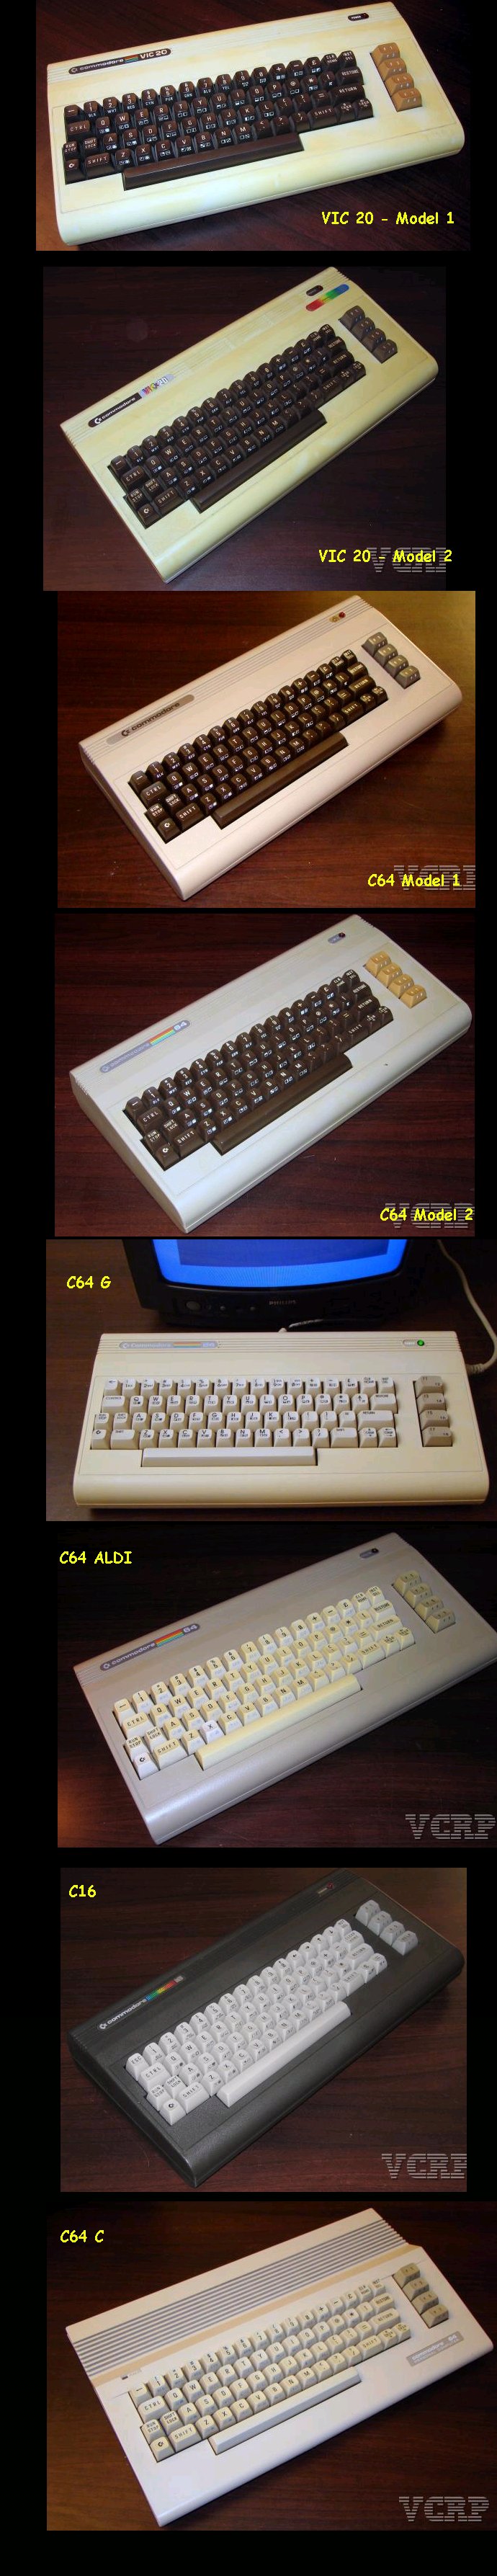 c64_and_co.jpg